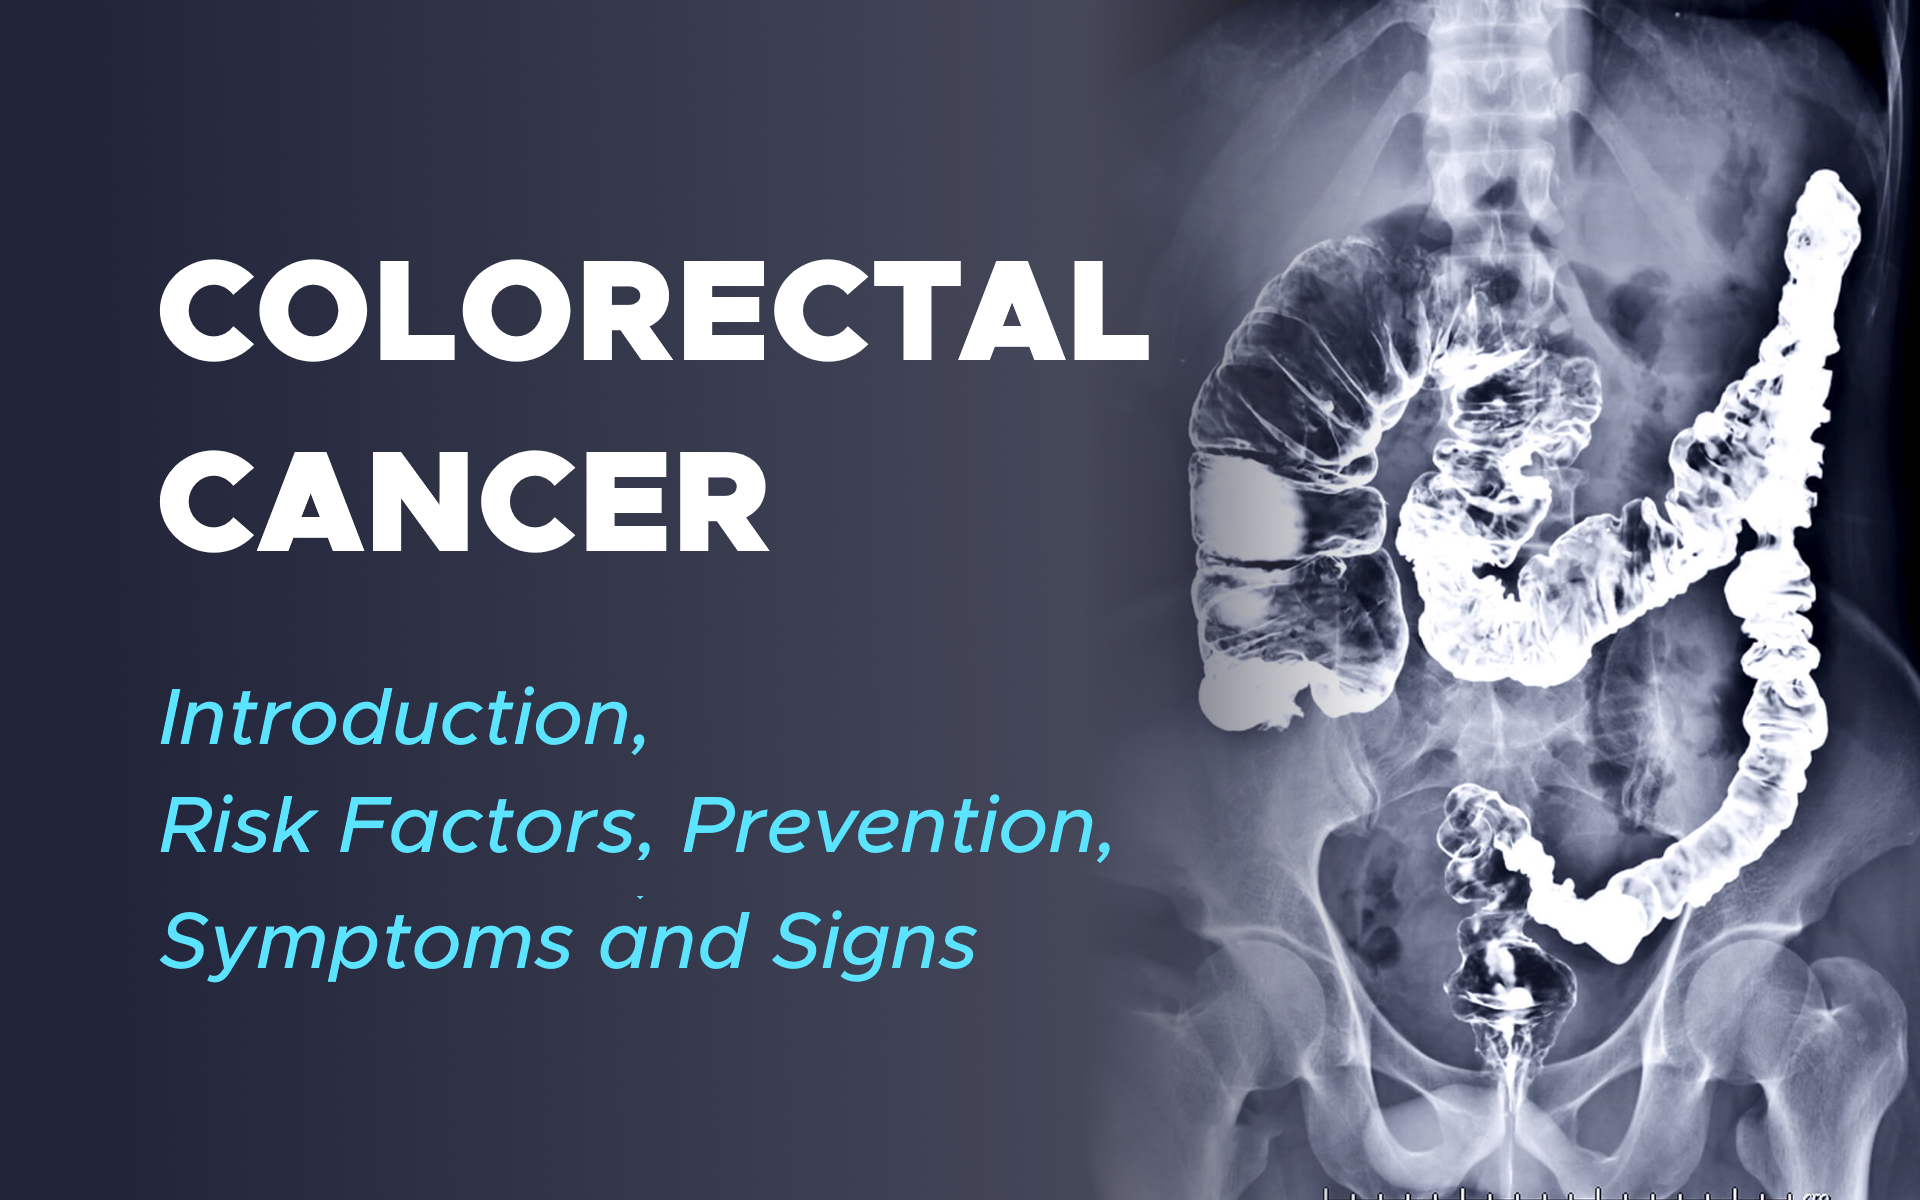 Colorectal Cancer Introduction, Risk Factors, Prevention, Symptoms and Signs